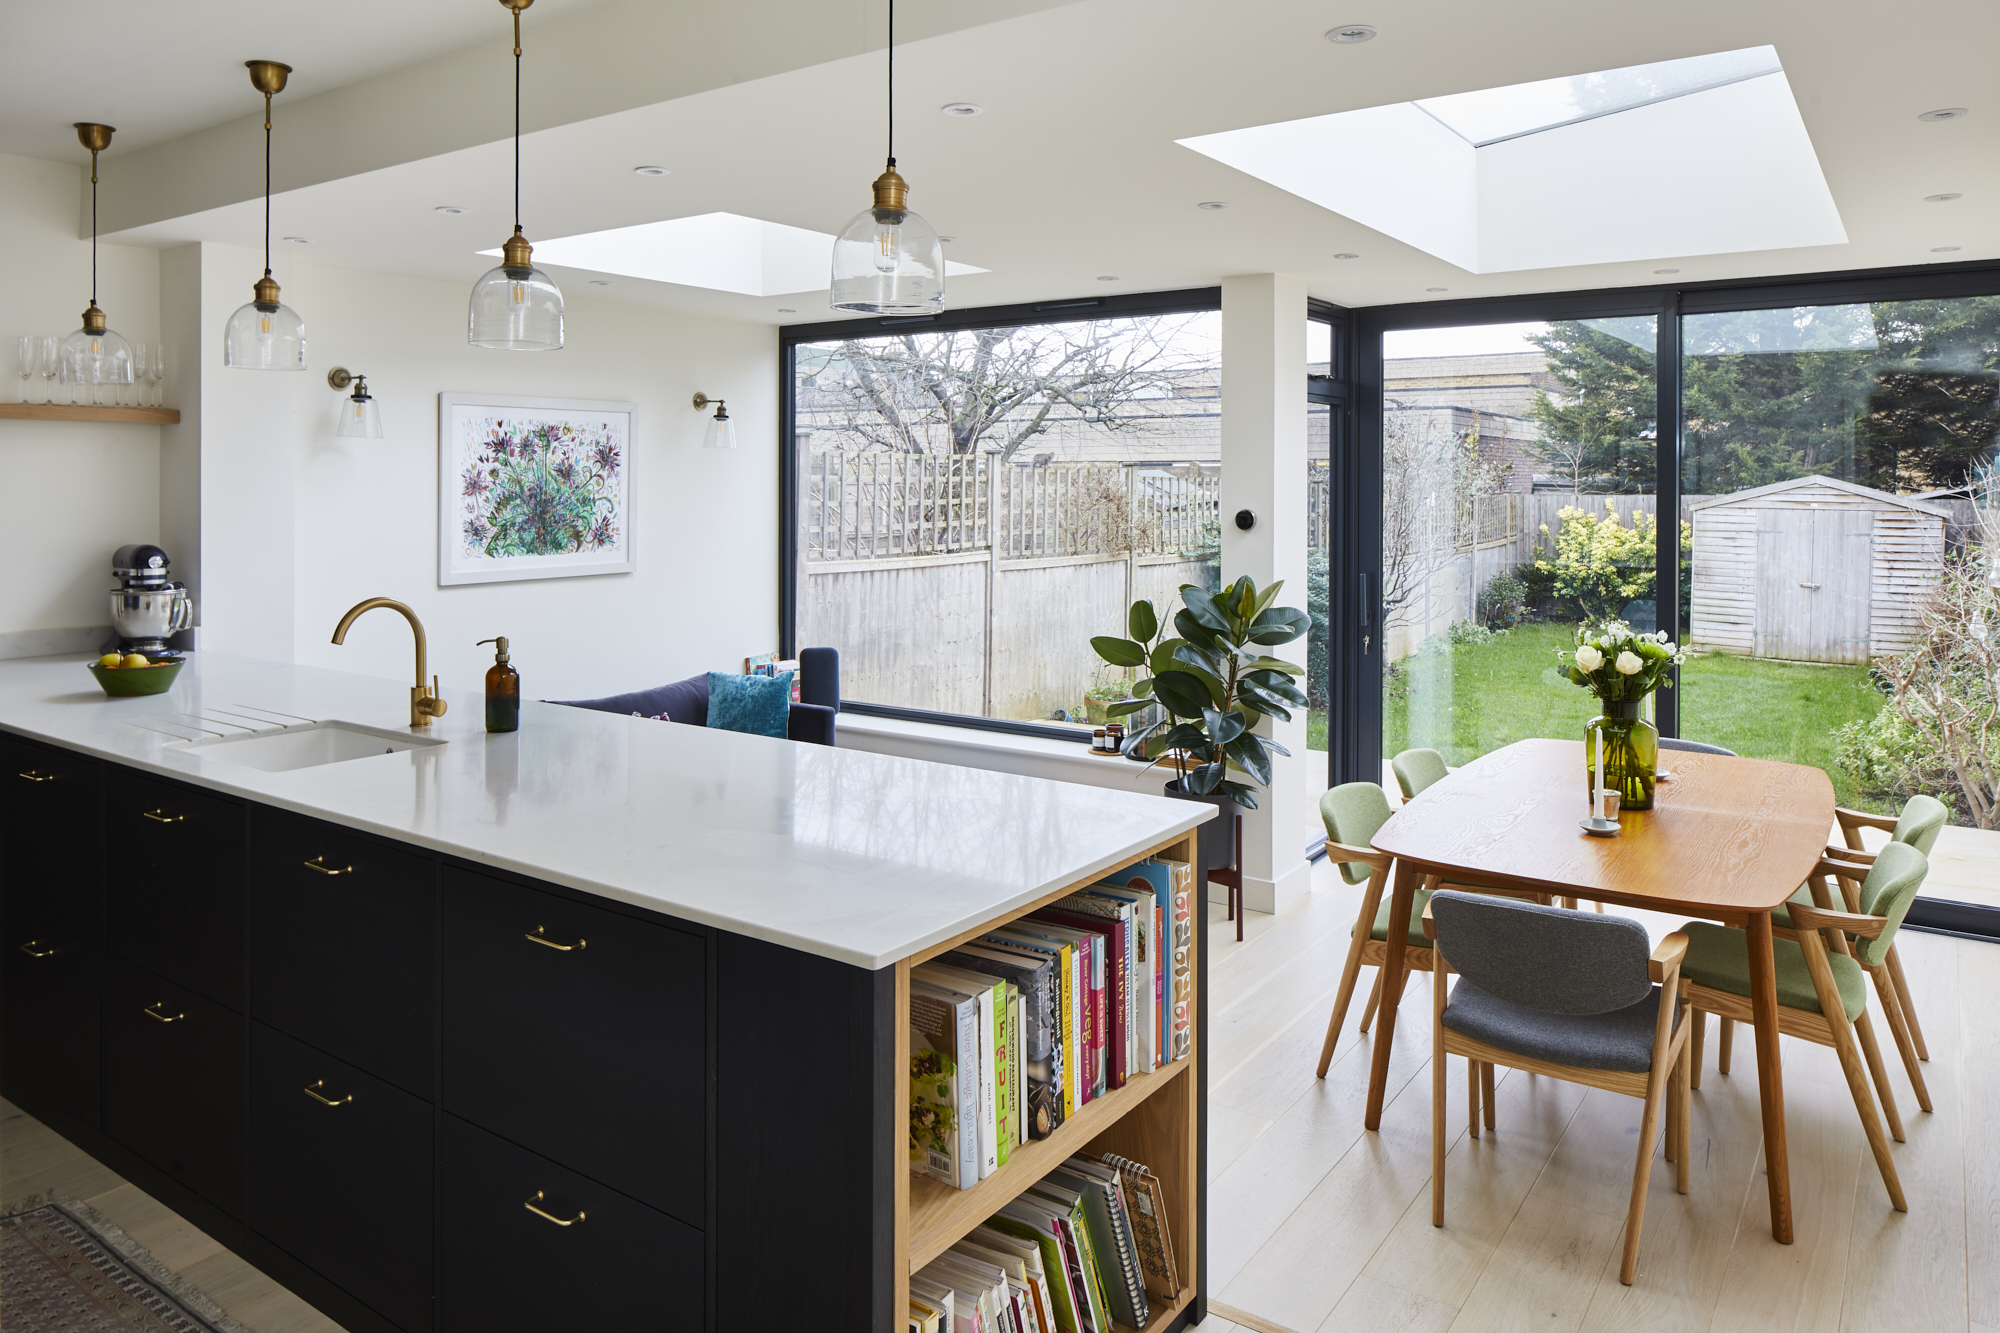 </p> <p>Find your ideal home design pro on designfor-me.com - get matched and see who's interested in your home project. Click image to see more inspiration from our design pros</p> <p>Design by Richard, architect from Lambeth, London</p> <p>#architecture #homedesign #modernhomes #homeinspiration #kitchens #kitchendesign #kitcheninspiration #kitchenideas #kitchengoals #extensions #extensiondesign #extensioninspiration #extensionideas #houseextension </p> <p>